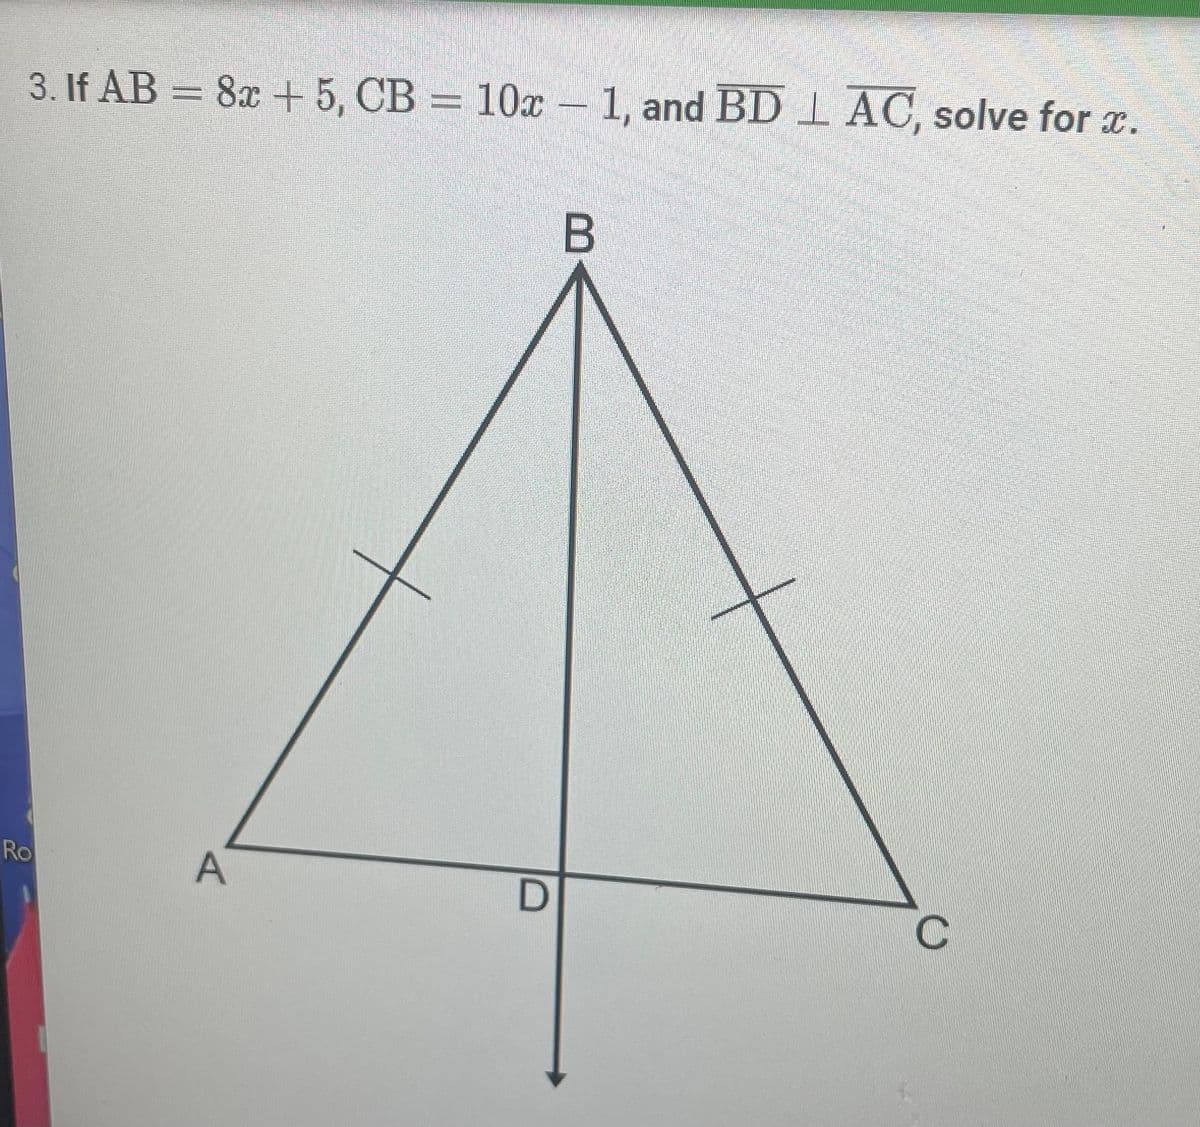 **Mathematics Problem: Solving for x in a Triangle**

**Problem Statement:** 
Given a triangle \( \triangle ABC \), where:
- \( AB = 8x + 5 \)
- \( CB = 10x - 1 \)
- \( BD \) is perpendicular to \( AC \)

Find the value of \( x \).

**Diagram Description:**
The diagram is a triangle \( \triangle ABC \) with the following characteristics:
- Points \( A \) and \( C \) are the base of the triangle.
- Point \( B \) is the vertex opposite the base \( AC \).
- \( BD \) is a straight line perpendicular to the base \( AC \), intersecting it at point \( D \).
- The segments \( AB \) and \( CB \) have markings indicating that they are equal in length.
- This implies that \( \triangle ABC \) is an isosceles triangle with \( AB = CB \).

**Solution Process:**

1. **Equality of Sides in an Isosceles Triangle:**
   Since \( AB = CB \):
   \[
   8x + 5 = 10x - 1
   \]

2. **Solving for \( x \):**
   Simplify the equation to find the value of \( x \):
   \[
   8x + 5 = 10x - 1
   \]
   Subtract \( 8x \) from both sides:
   \[
   5 = 2x - 1
   \]
   Add 1 to both sides:
   \[
   6 = 2x
   \]
   Divide both sides by 2:
   \[
   x = 3
   \]

**Conclusion:**
The value of \( x \) that satisfies the given conditions of the triangle is \( x = 3 \).